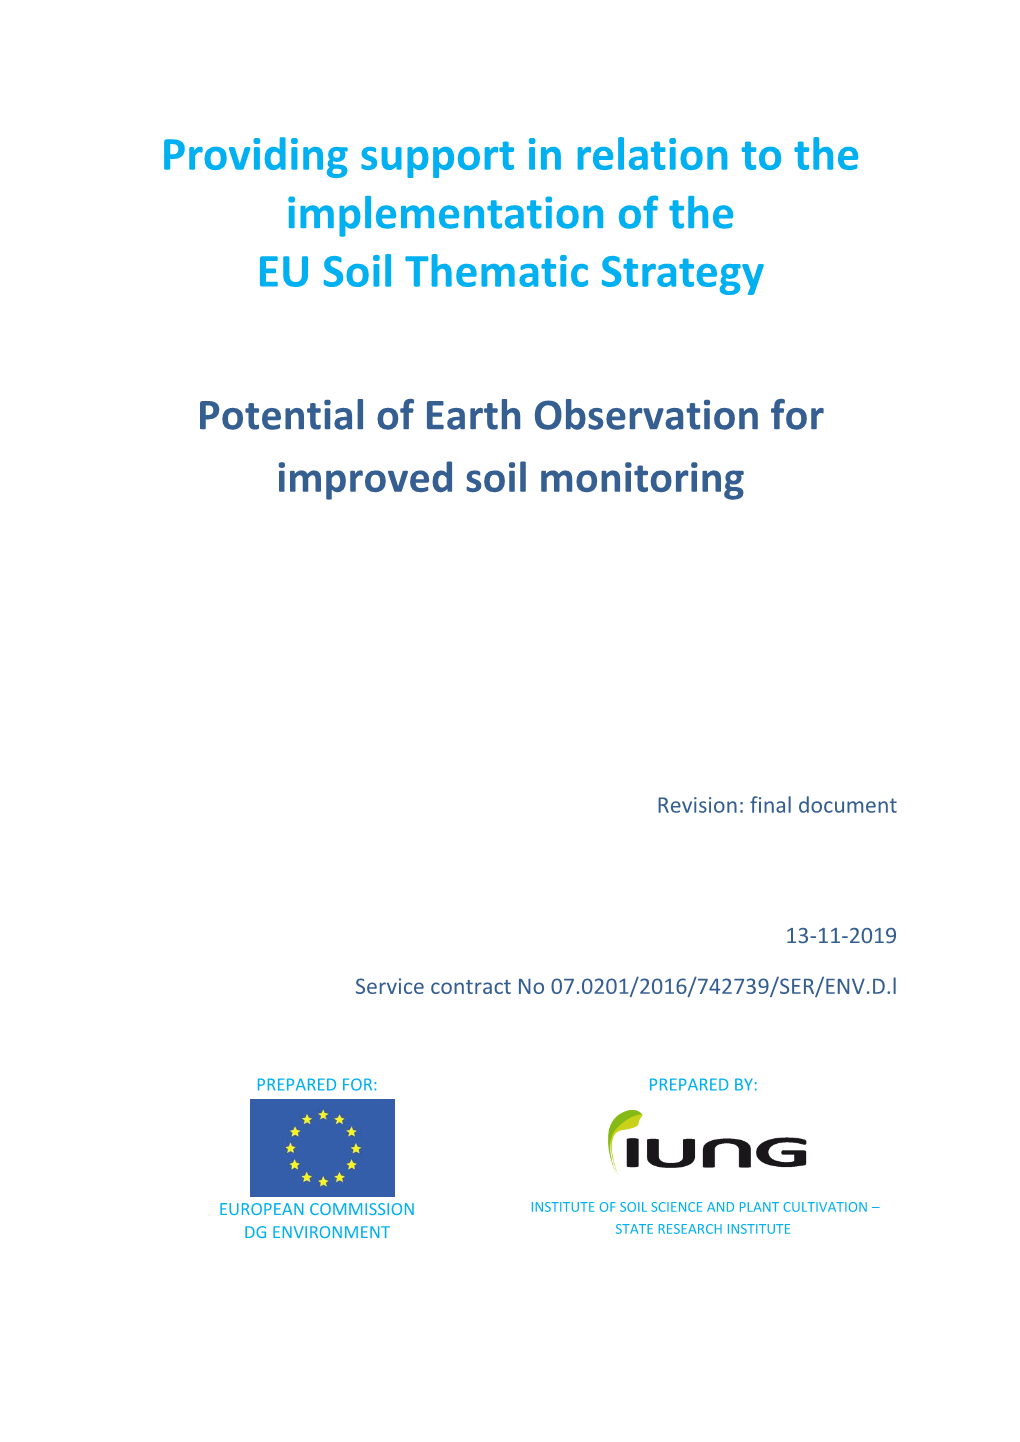 Potential of Earth Observation for Improved Soil Monitoring